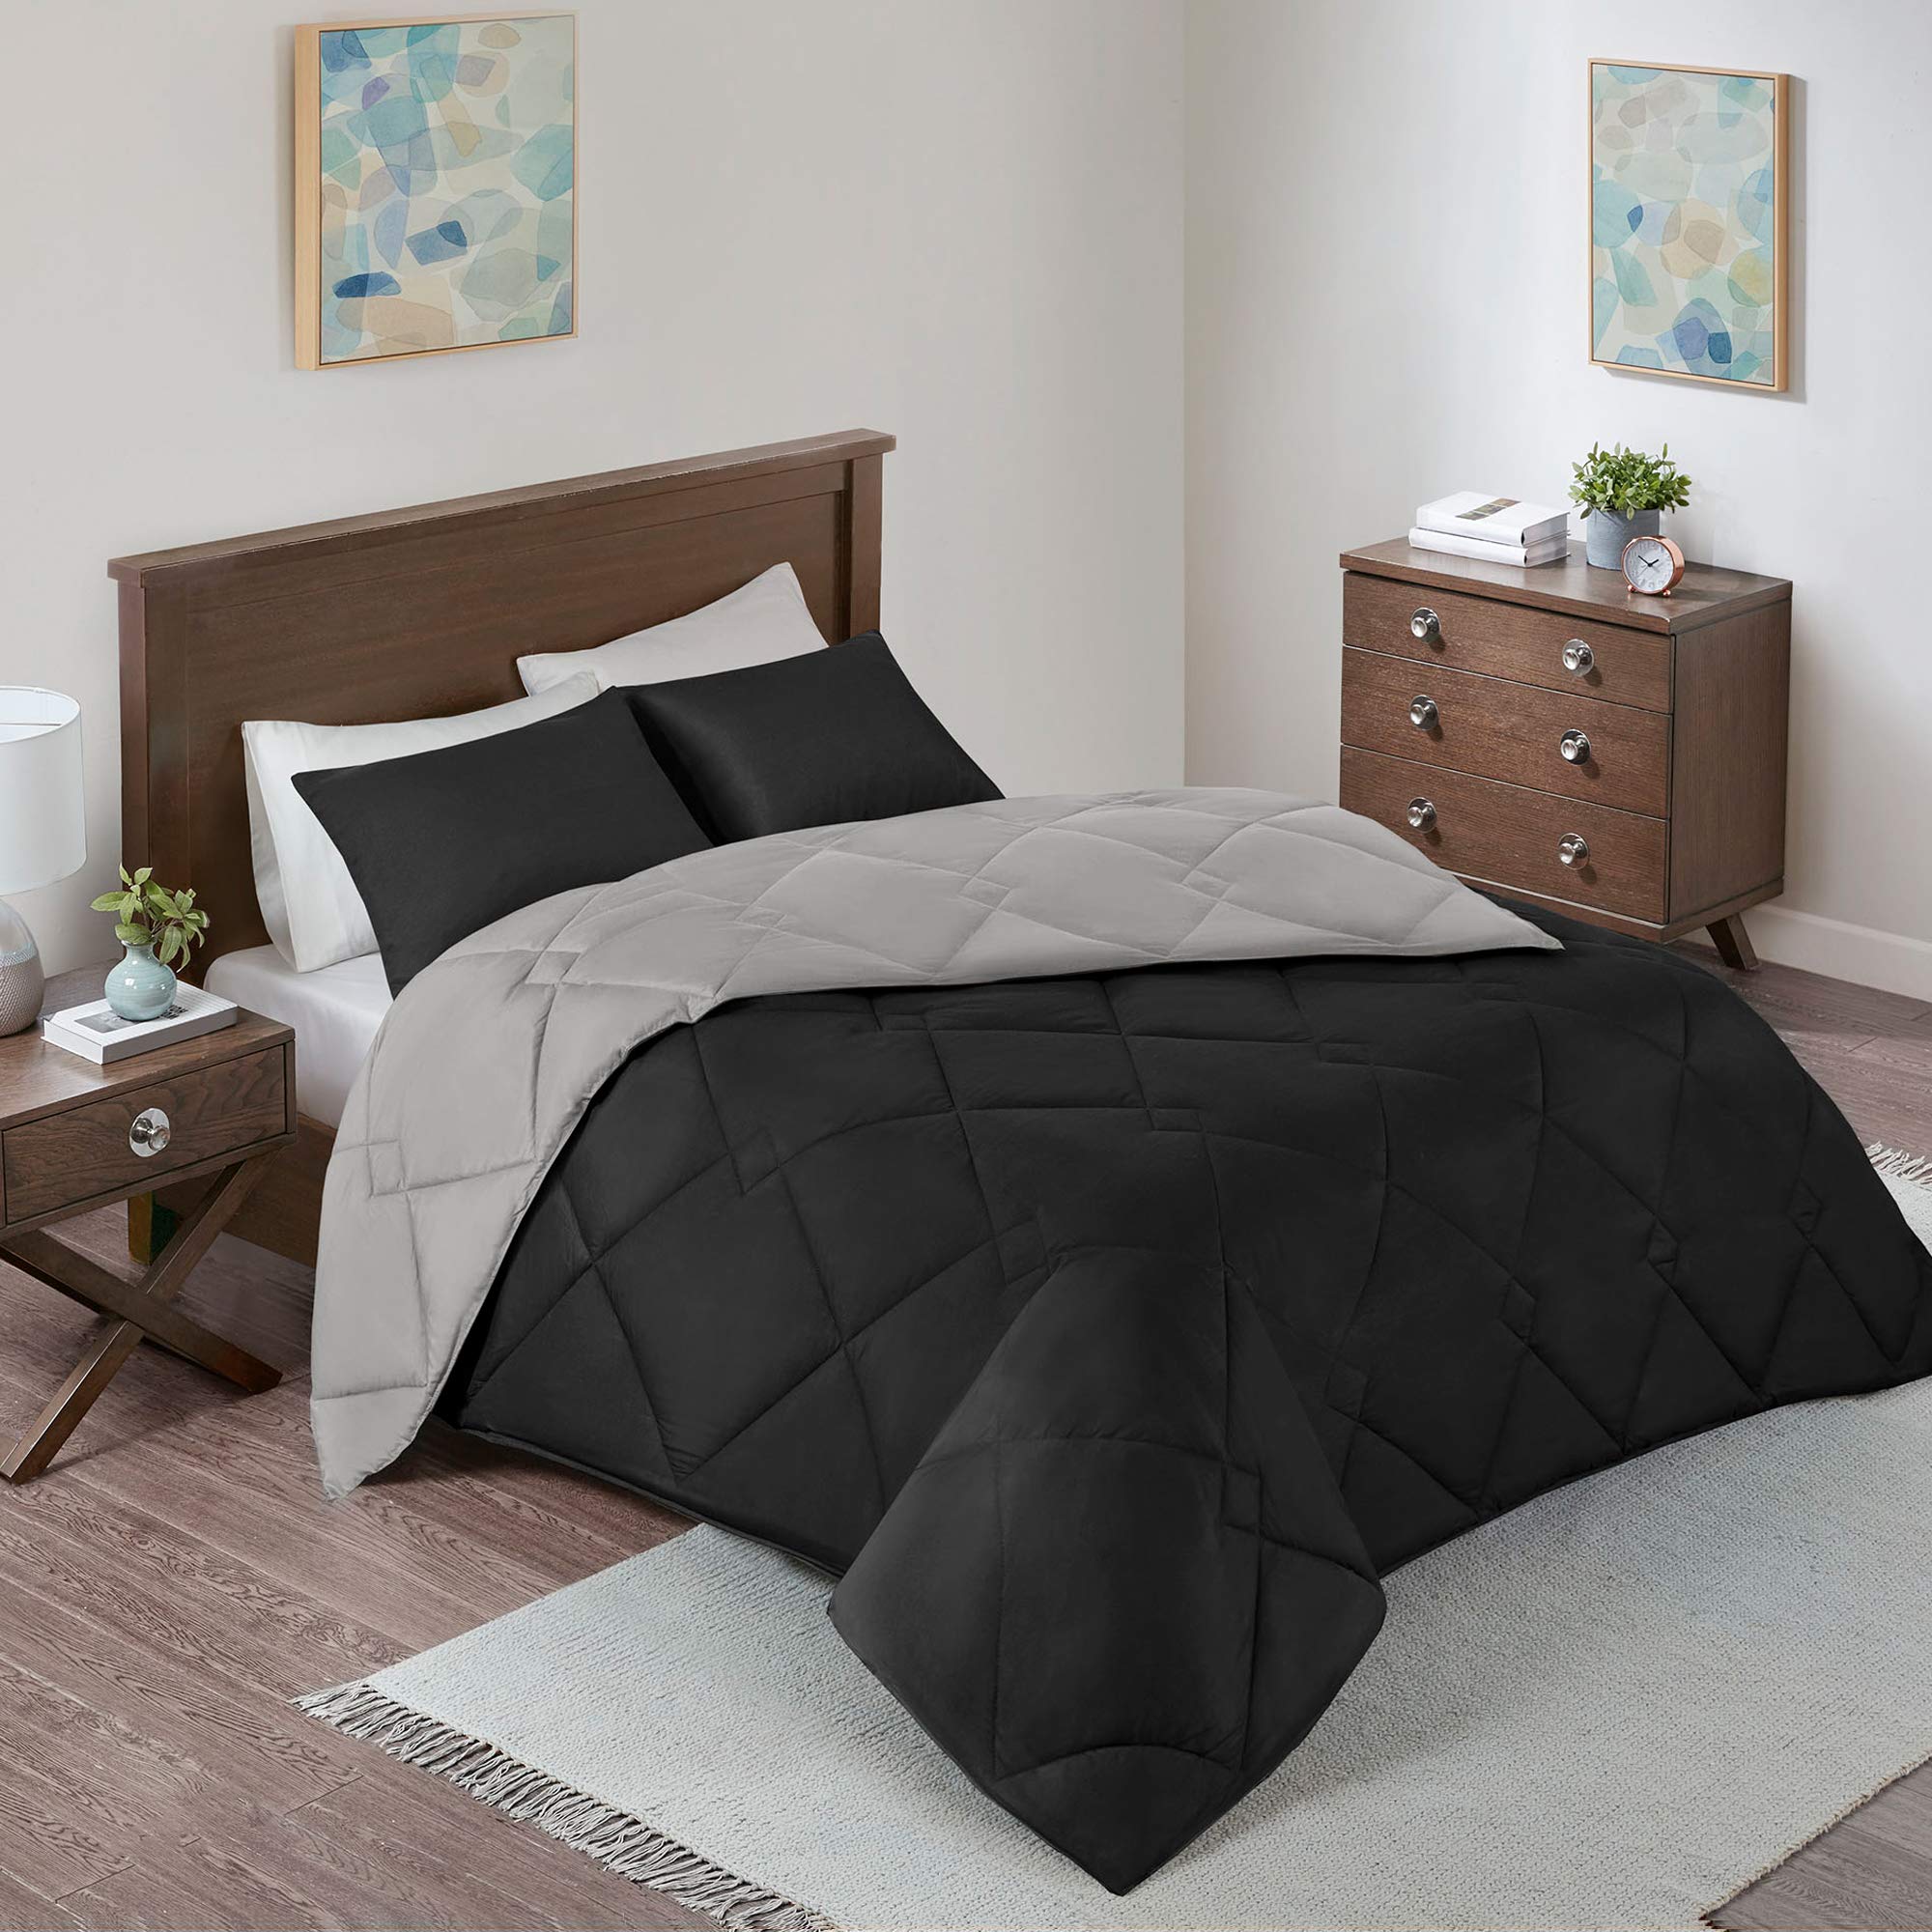 Book Cover Comfort Spaces Vixie Reversible Comforter Set - Trendy Casual Geometric Quilted Cover, All Season Down Alternative Cozy Bedding, Matching Sham, Black/Gray, Twin/Twin XL 2 piece Black/Grey Twin/Twin XL